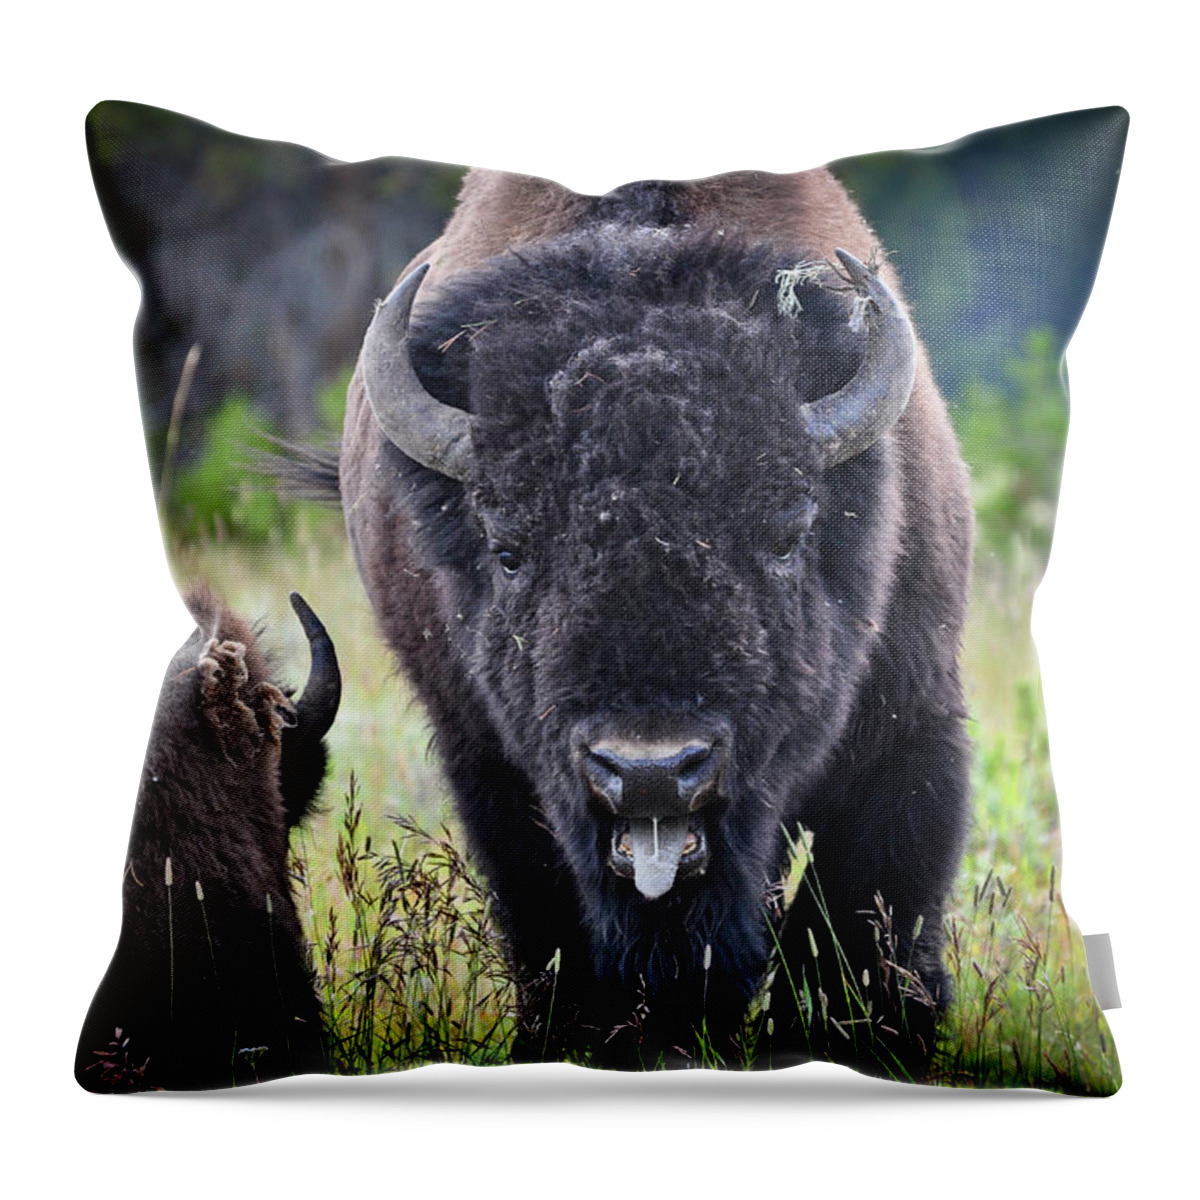 Yellowstone Throw Pillow featuring the photograph Angry Bison by Greg Norrell